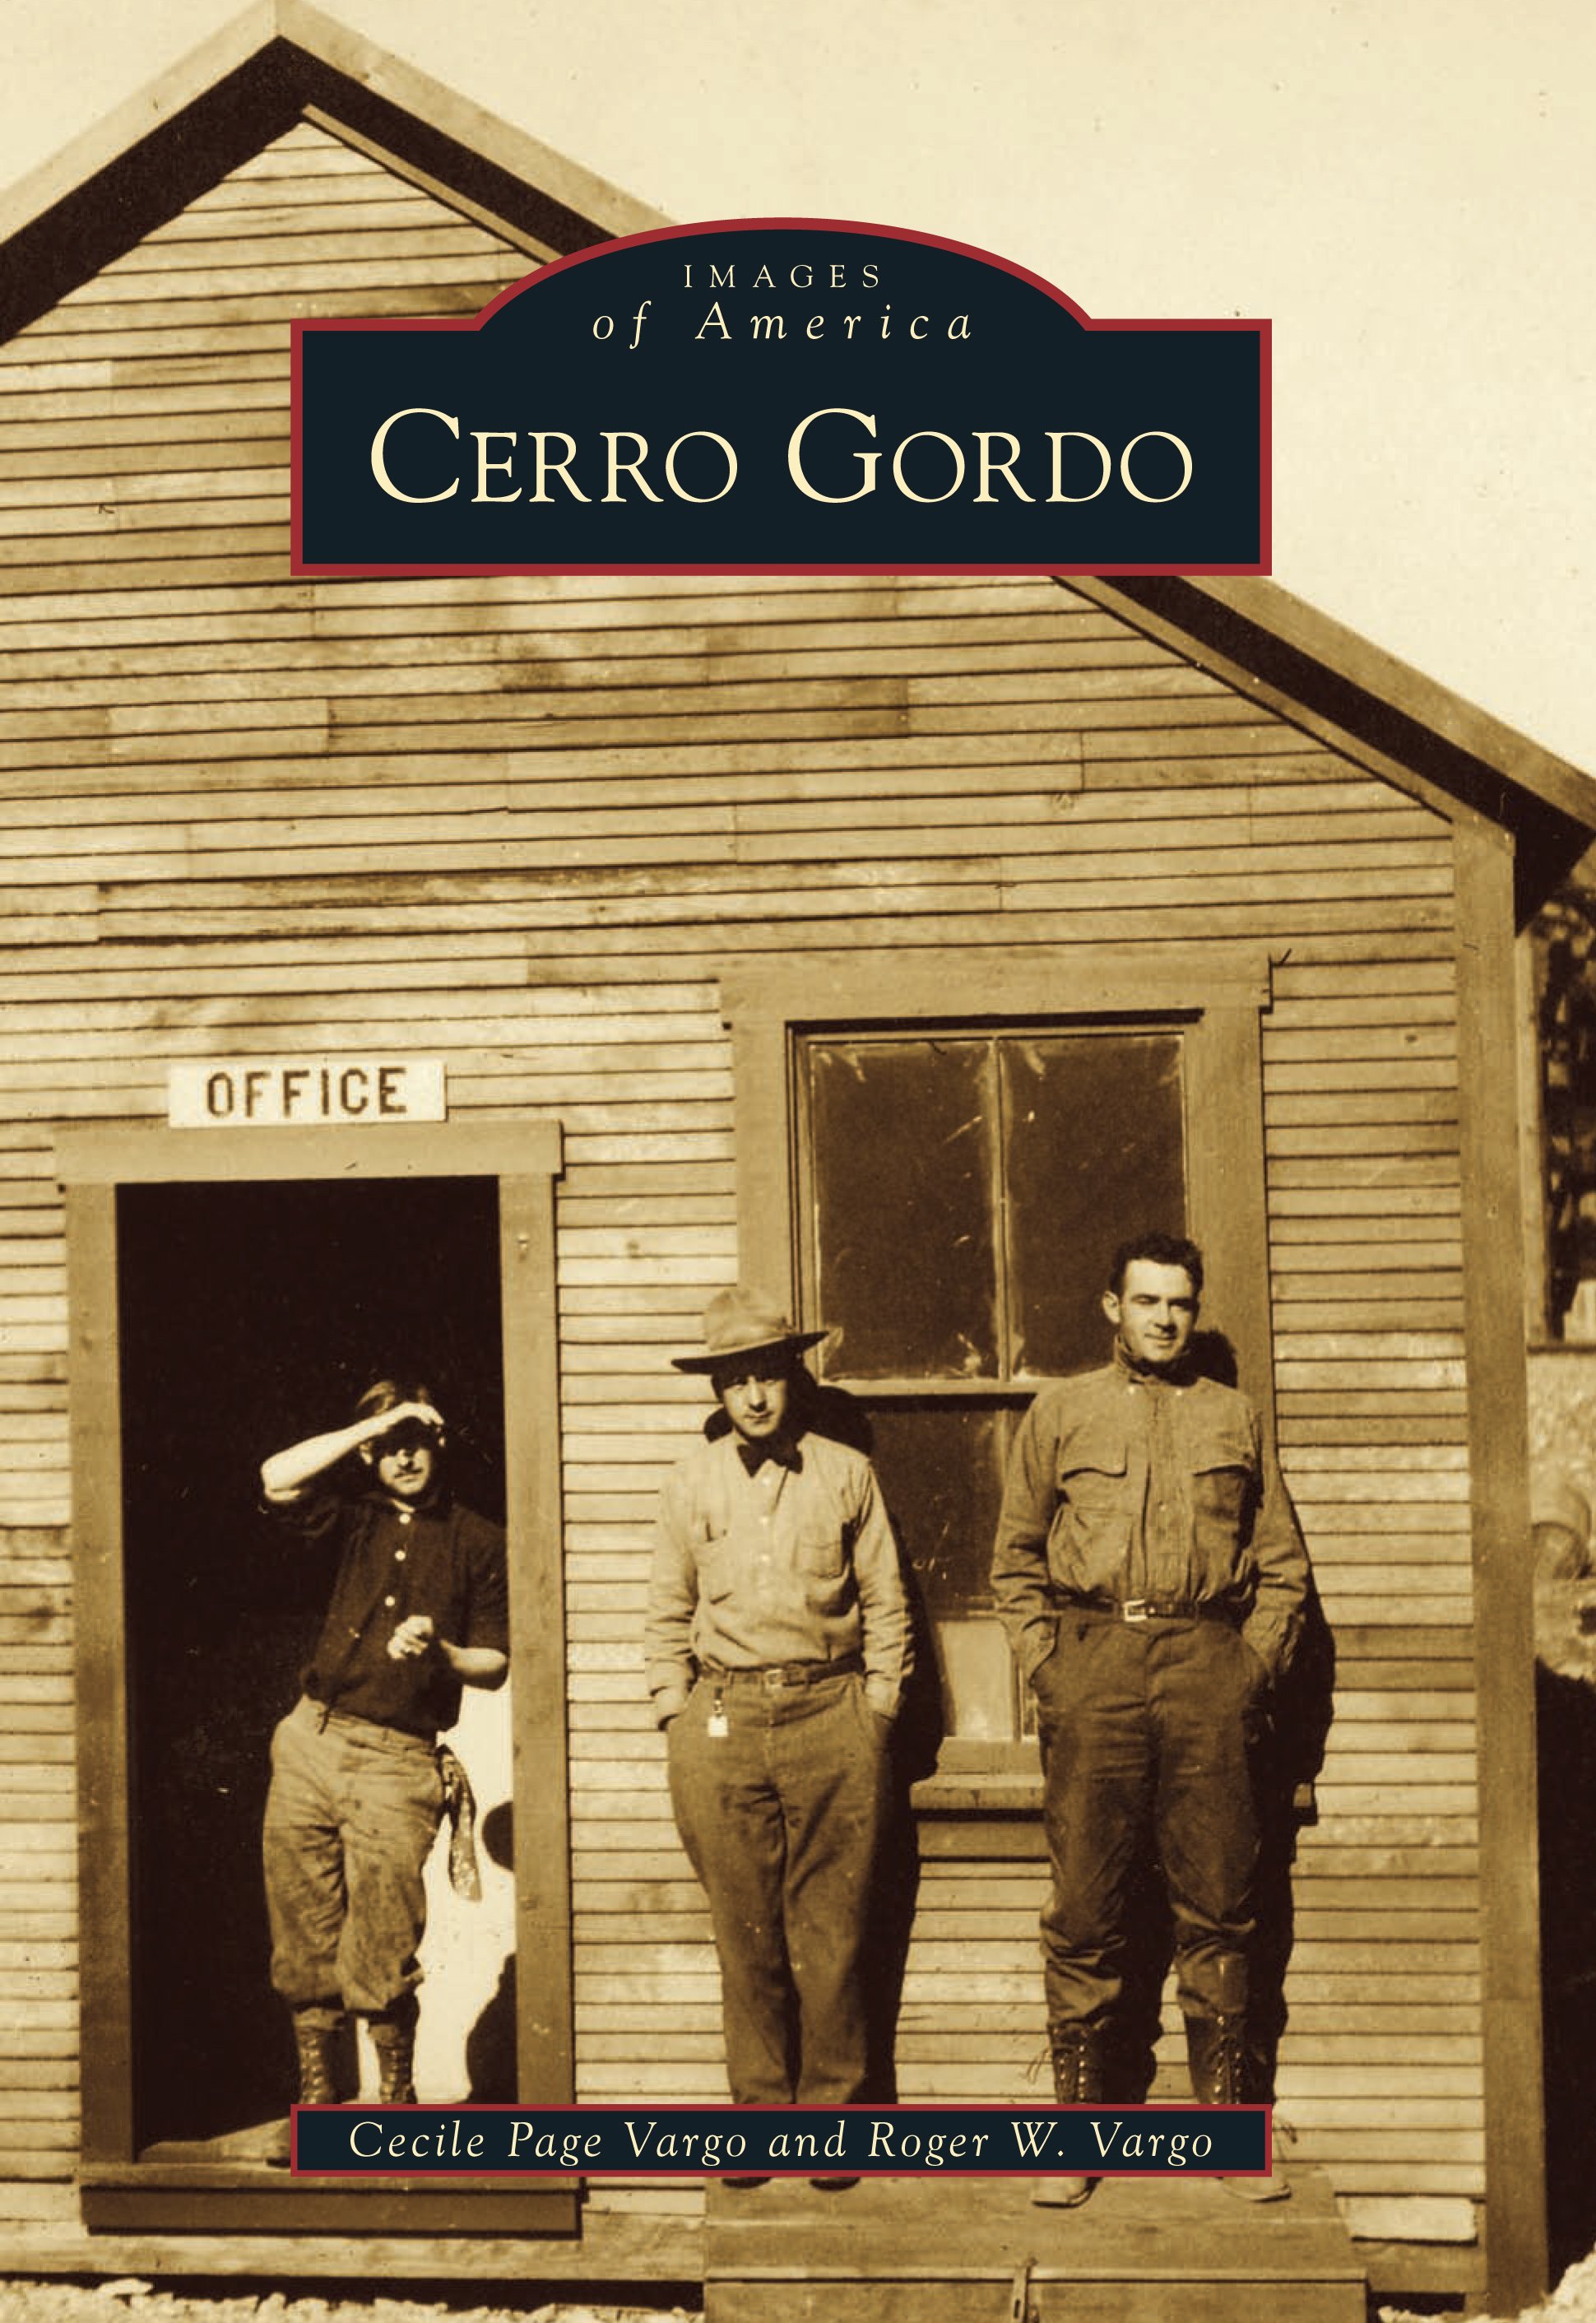  Images of America--Cerro Gordo book cover. My wife, Cecile, and I produced this for Arcadia Publishing's Images of America series. 